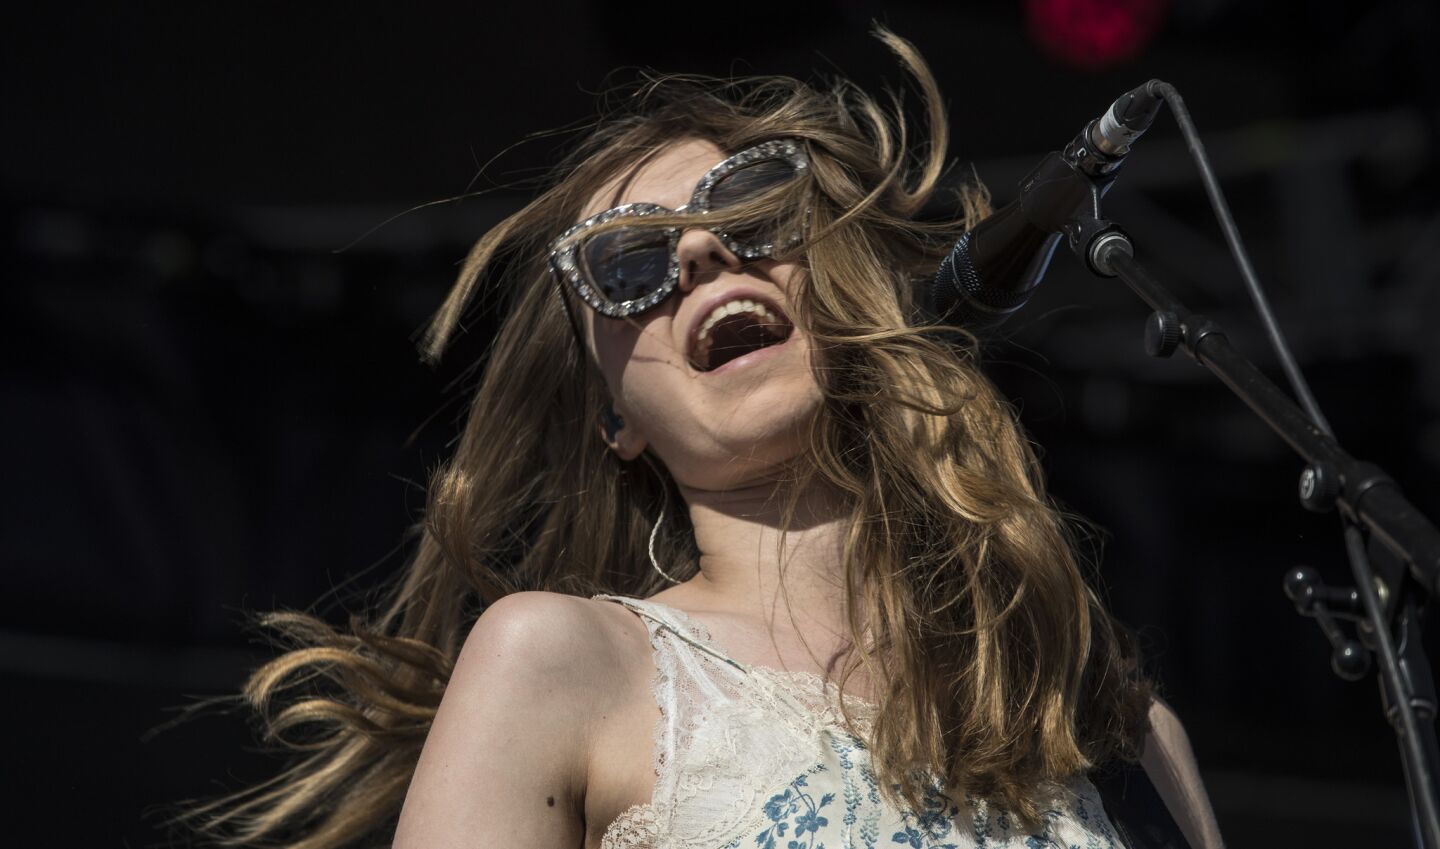 First Aid Kit's Johnna Soderberg onstage at the Coachella Valley Music and Arts Festival on April 14.